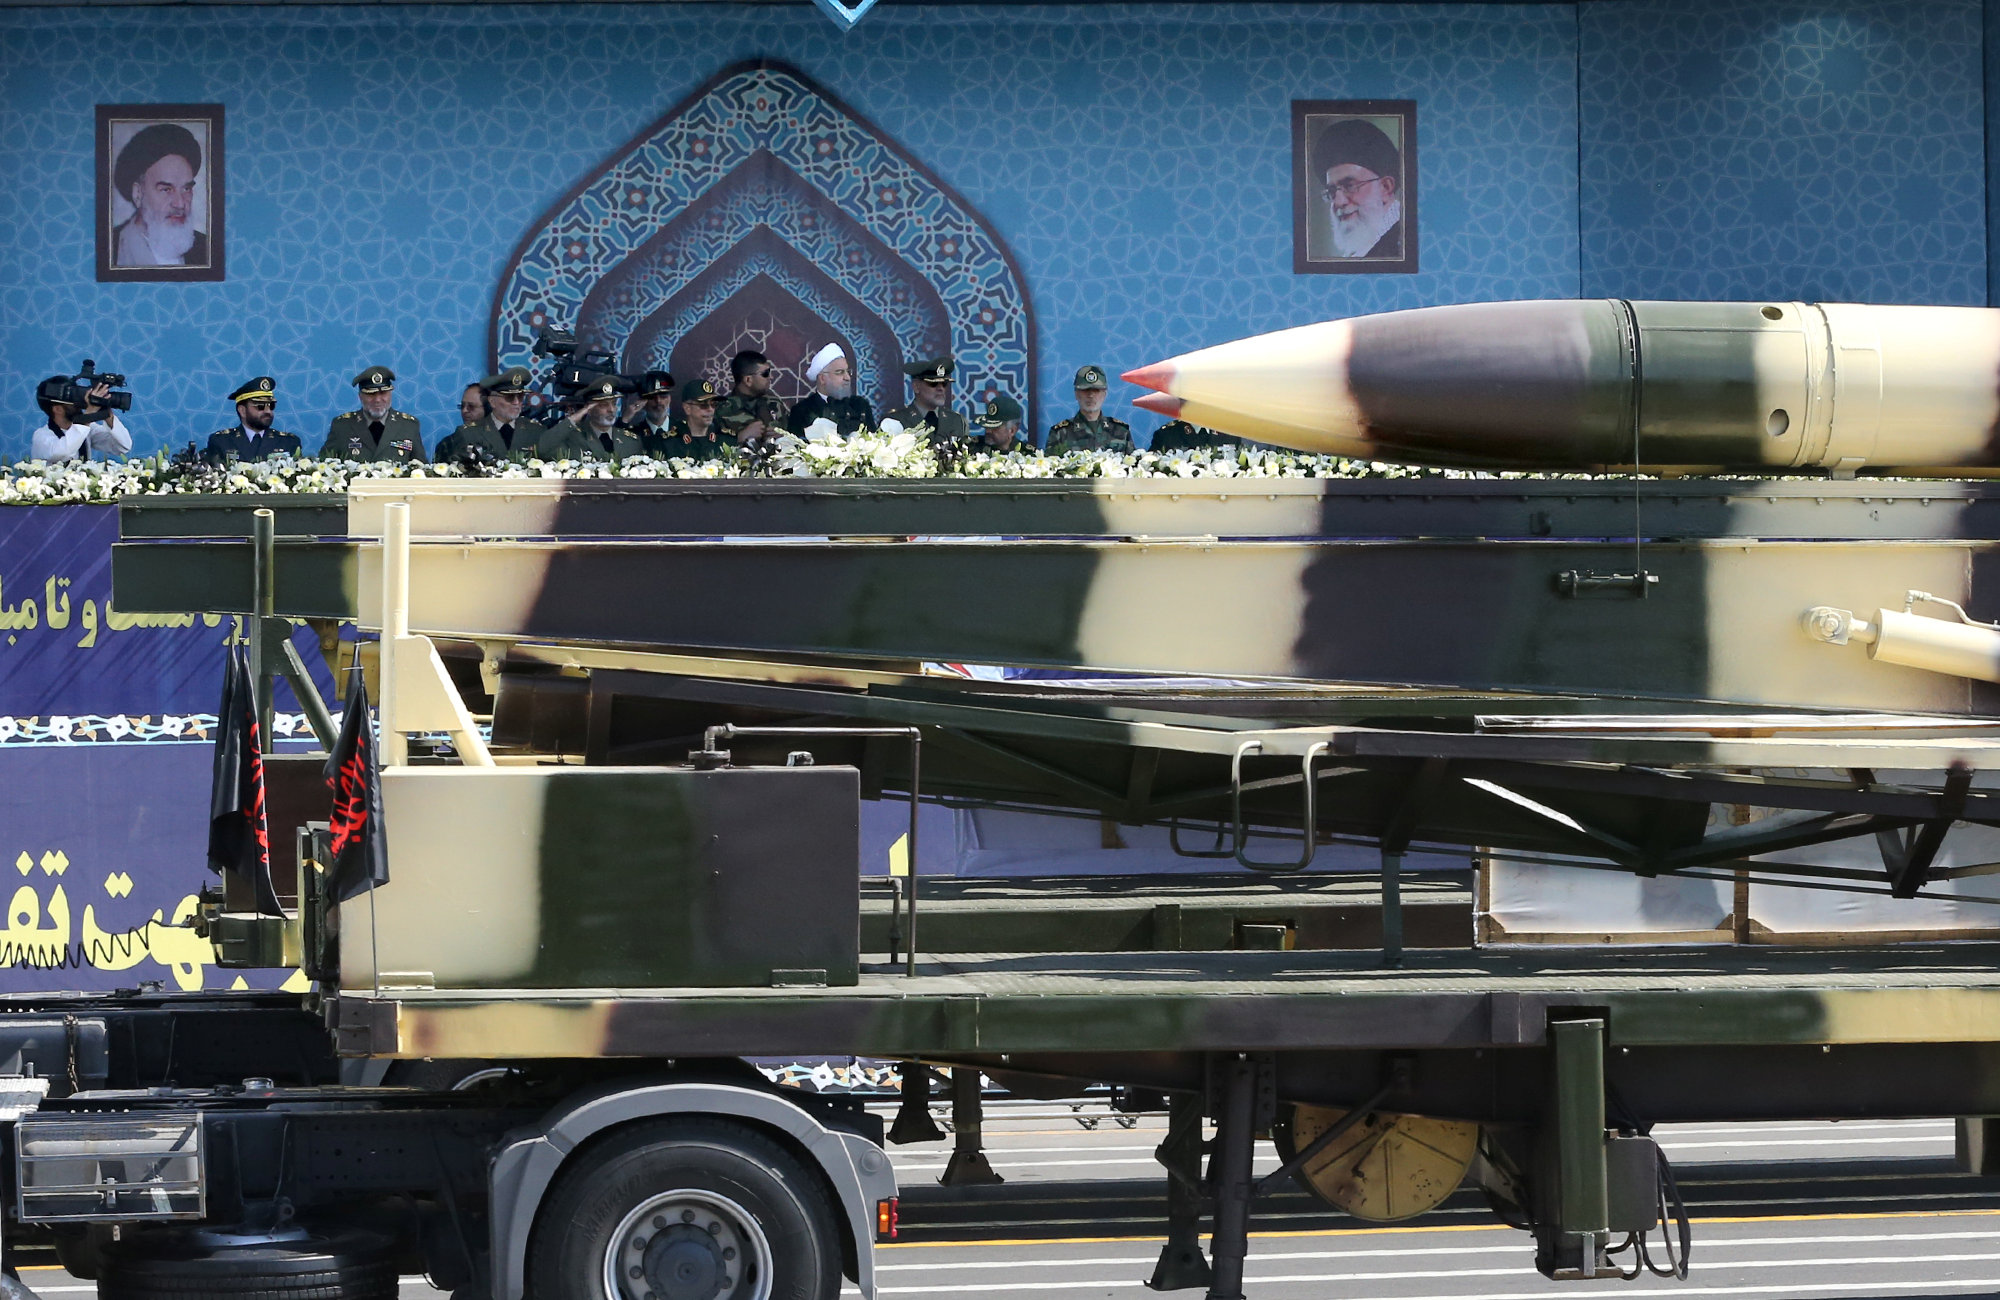 Iran successfully tested new ballistic missile with range of 2,000km